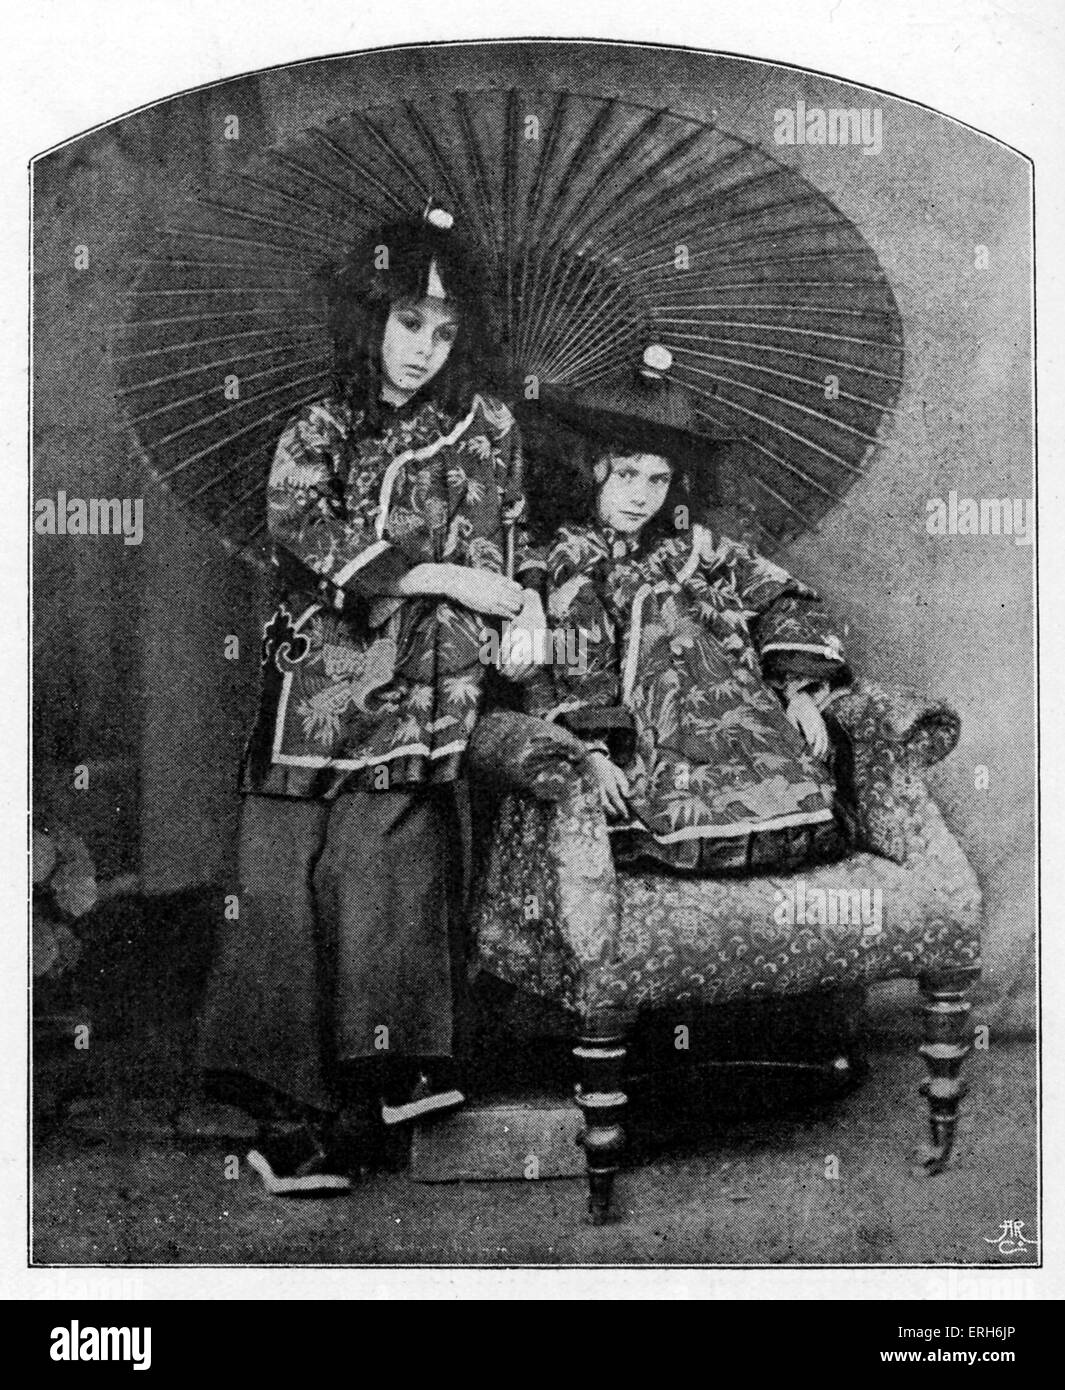 Liddell children -  photograph taken by Lewis Carroll. From left: Lorina and Alice Liddell in 'Chinese' costume.  Children of Stock Photo